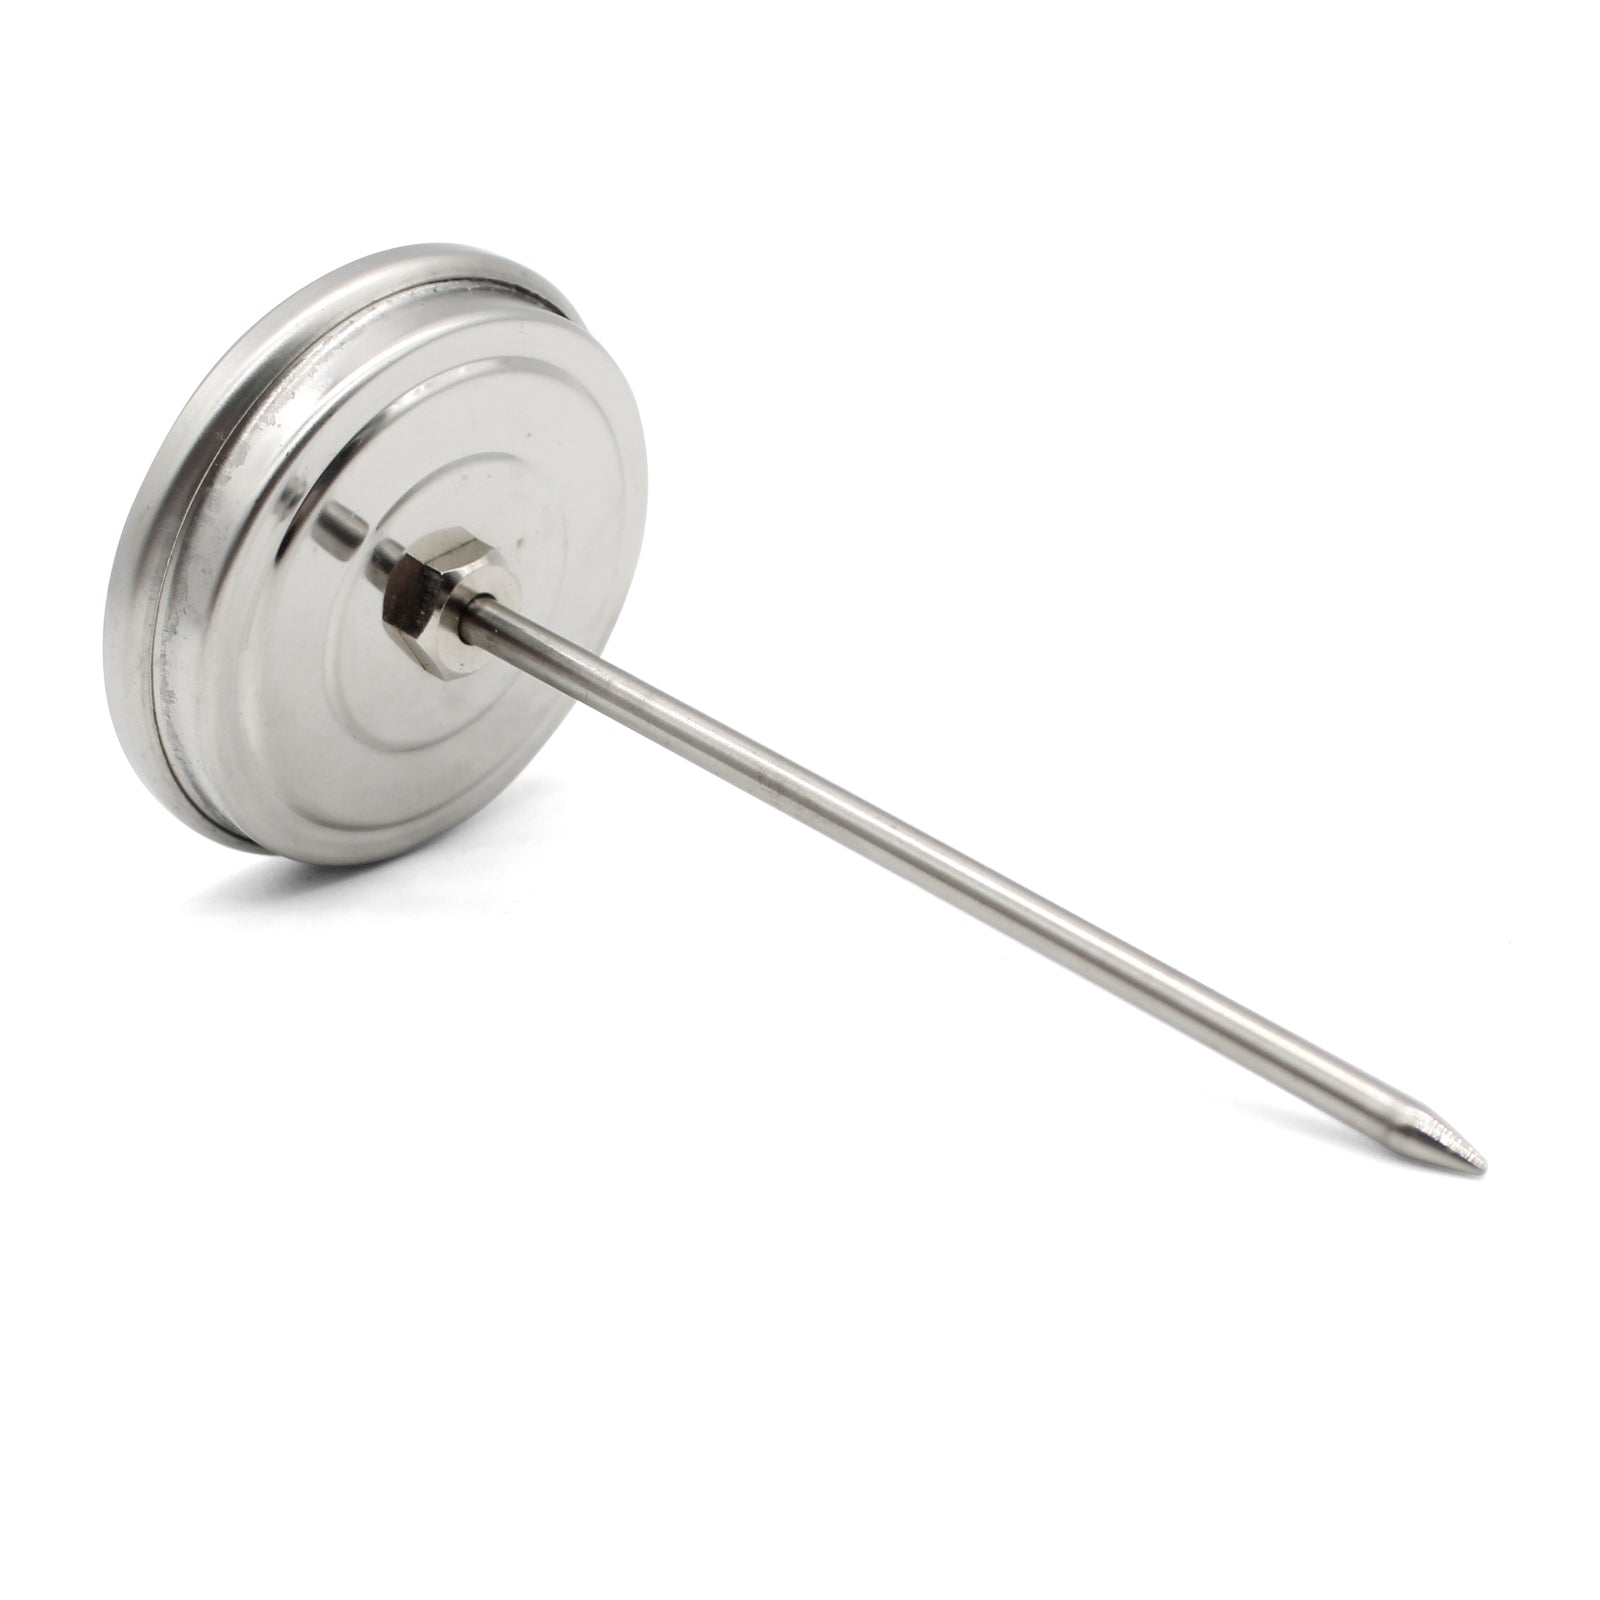 LK's Metal Meat Thermometer